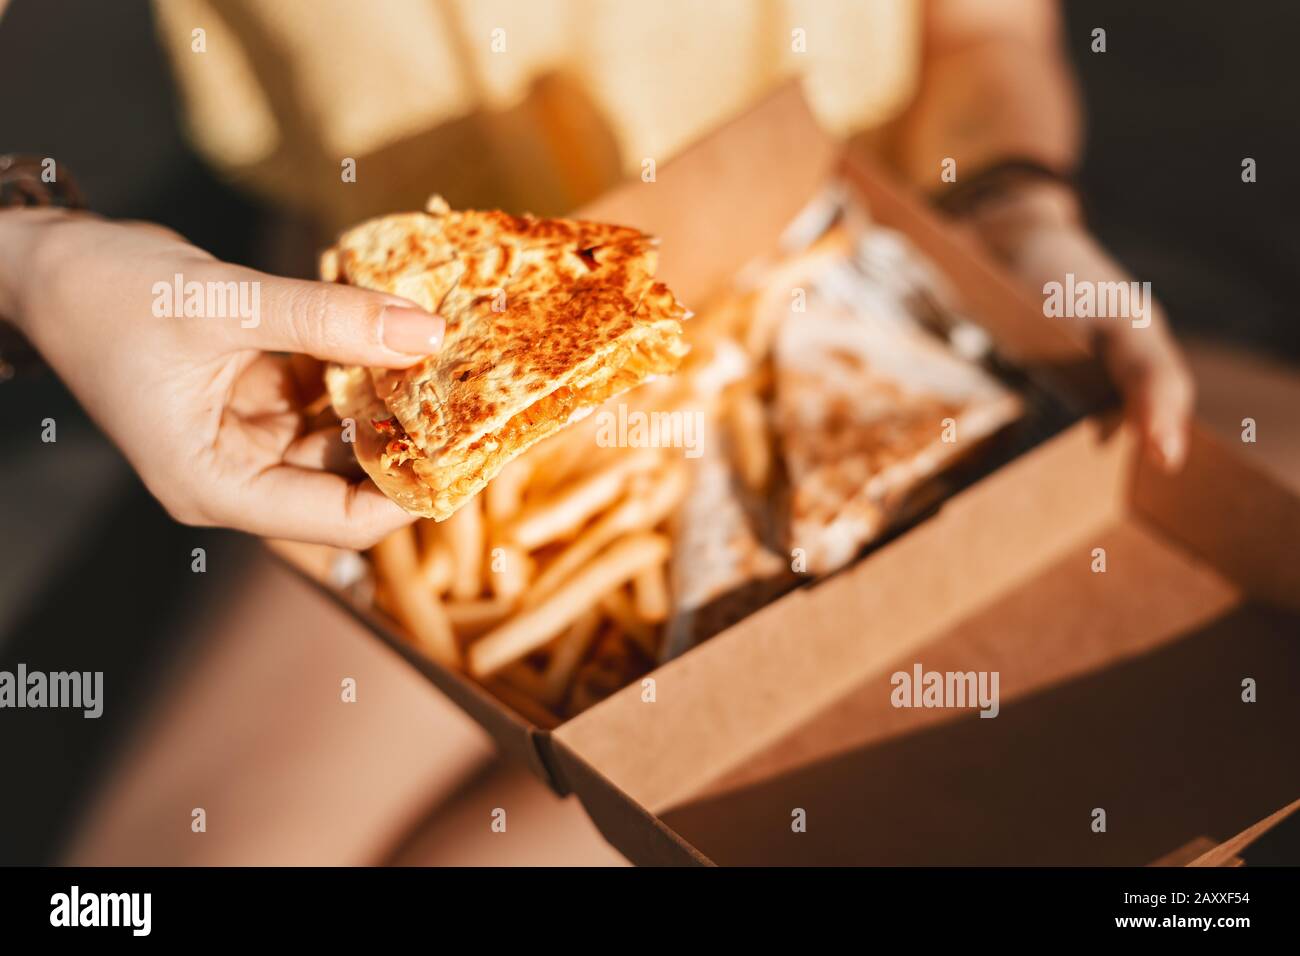 Happy girl eating Mexican fast food quesadilla. Streetfood and junk food with high calories and fat Stock Photo